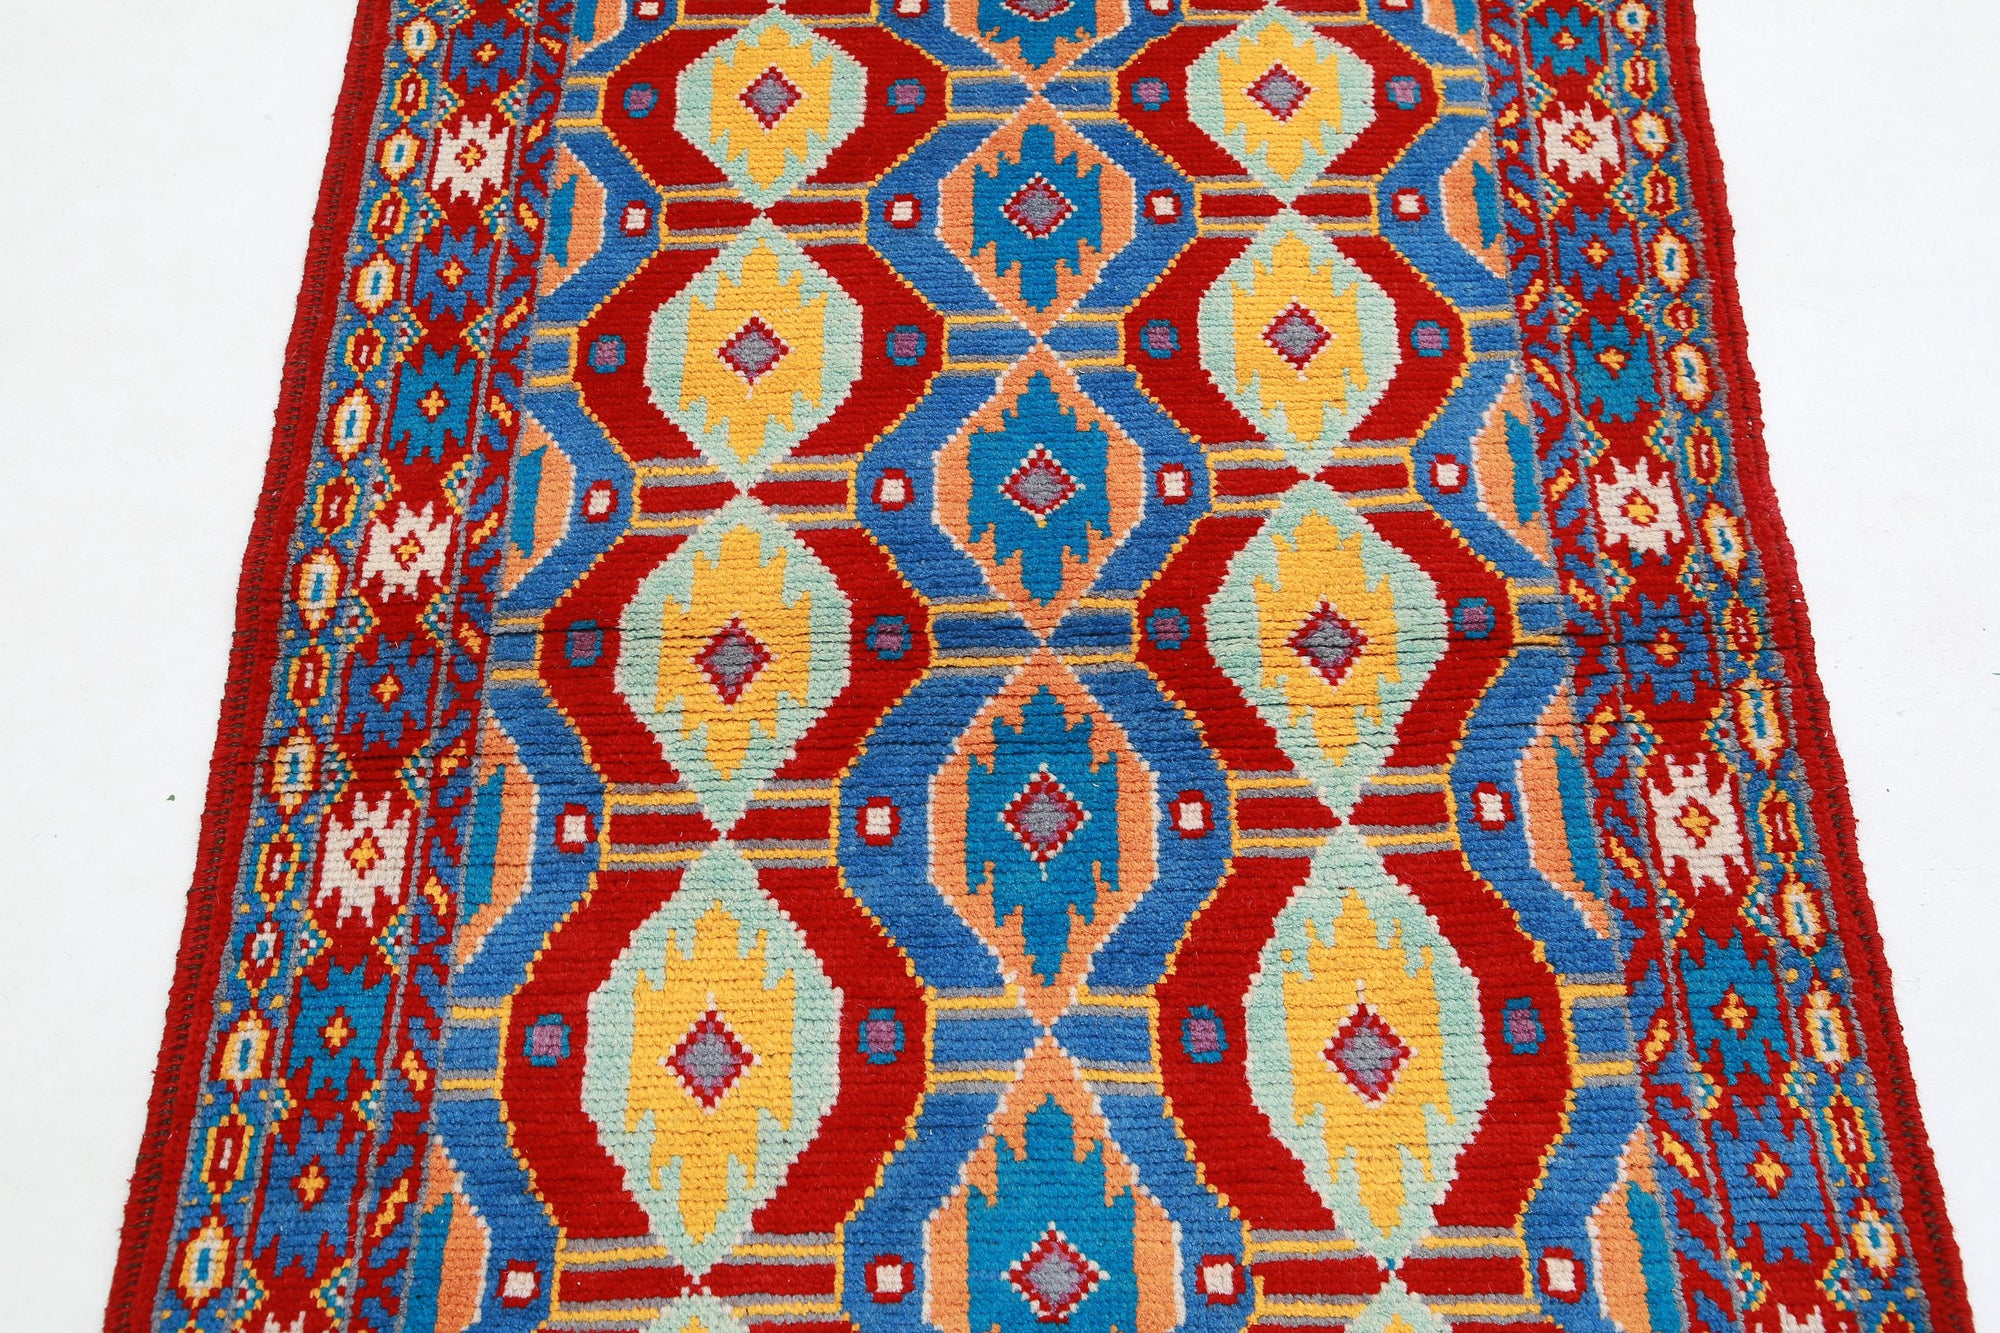 Revival-hand-knotted-qarghani-wool-rug-5014202-4.jpg